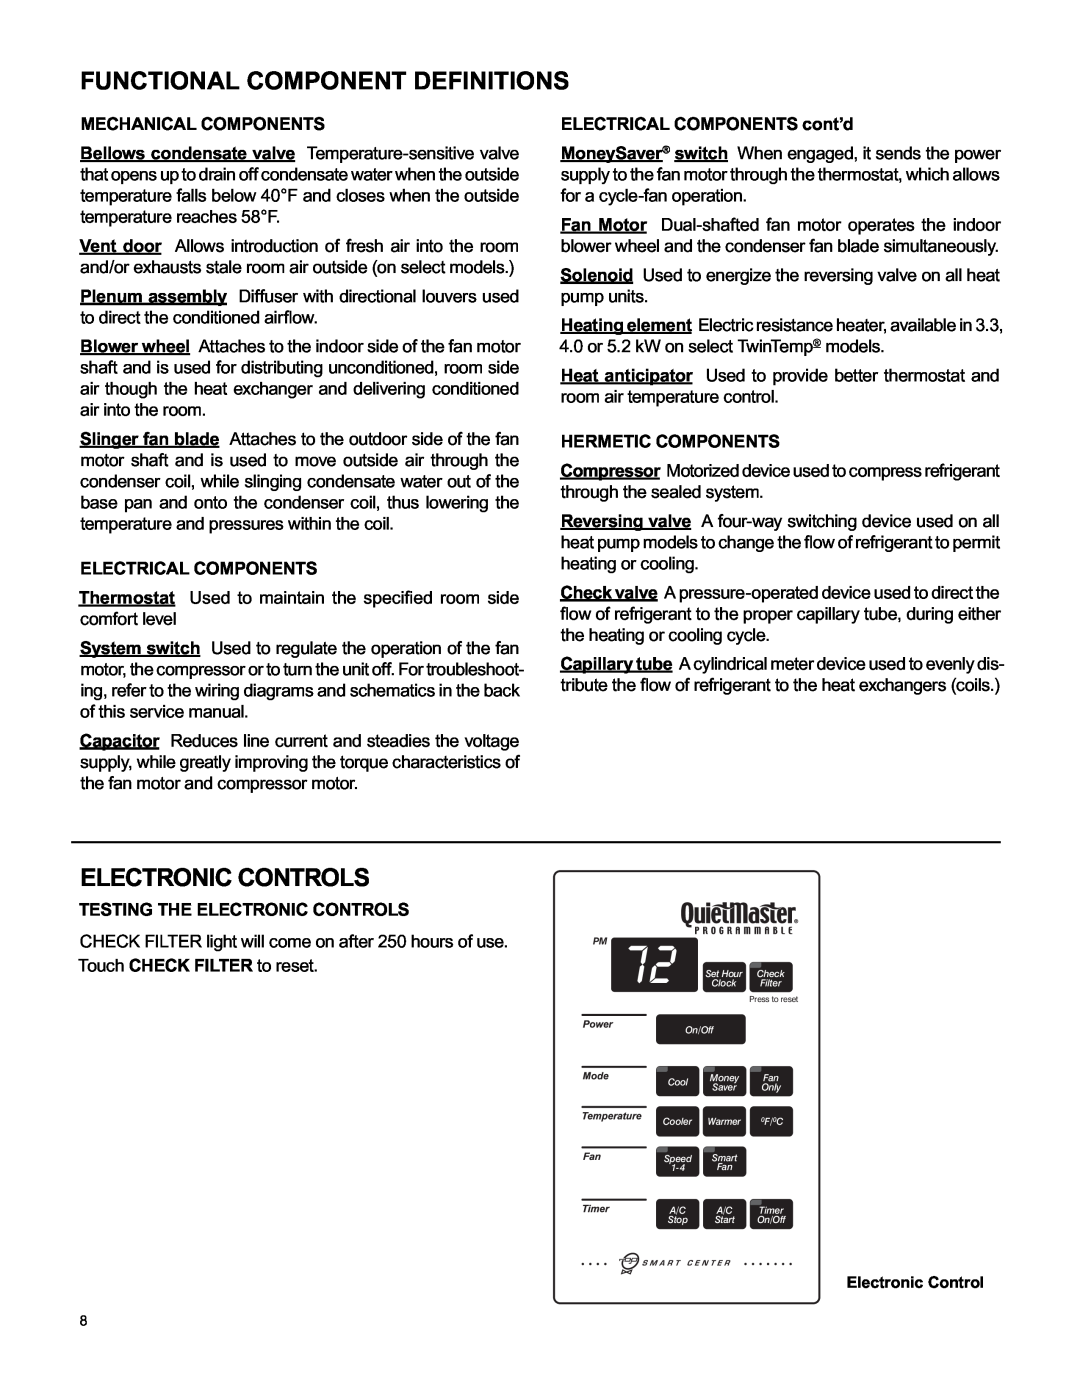 Friedrich RAC-SVC-06 Functional Component Definitions, Electronic Controls, Mechanical Components, Electrical Components 